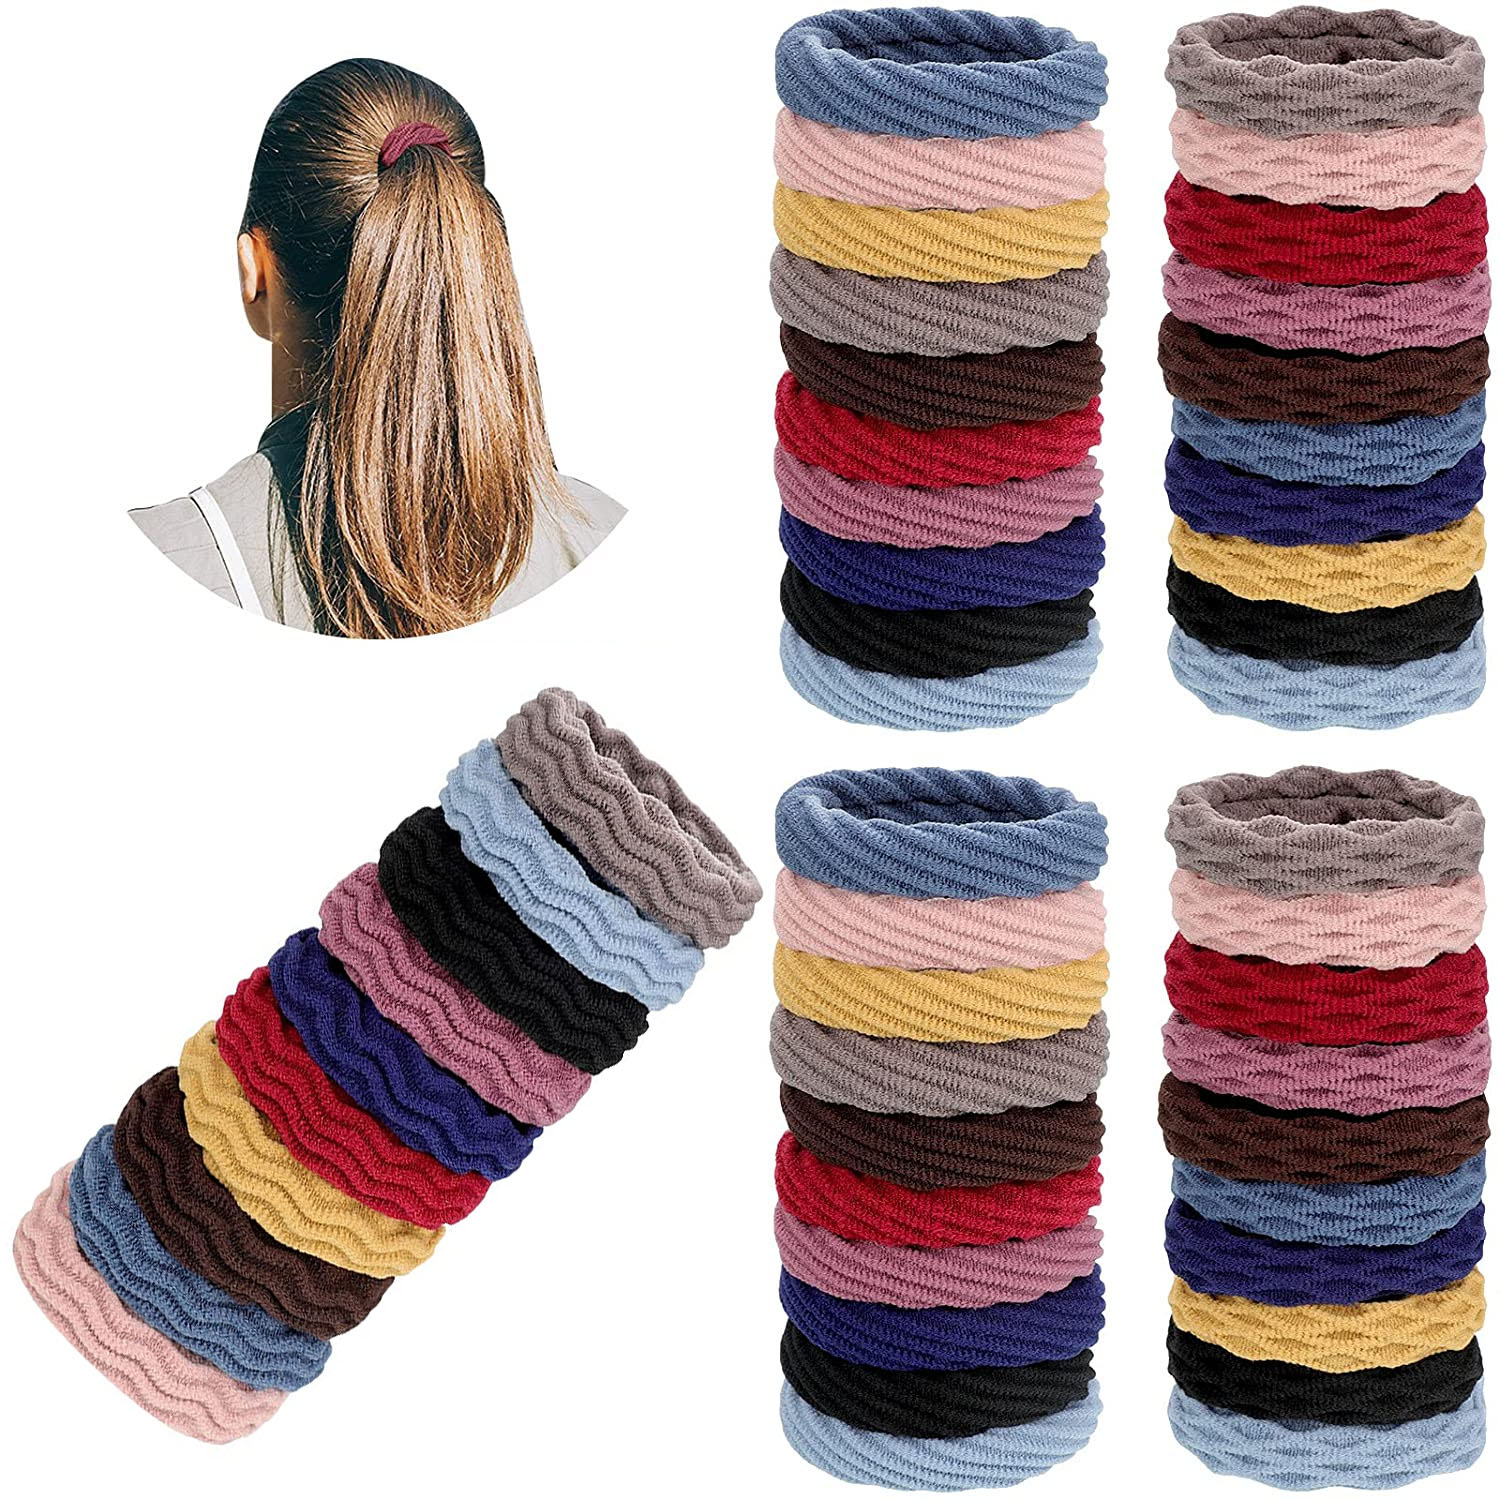 Triani 60Pcs Hair Ties for Thick Hair, Hair Ties No Crease, Seamless Cotton Hair Bands for Women, Simply Hair Tie Ponytail Holders, Hair Ties for Thick Heavy or Curly Hair (Multicolor) - image 1 of 7